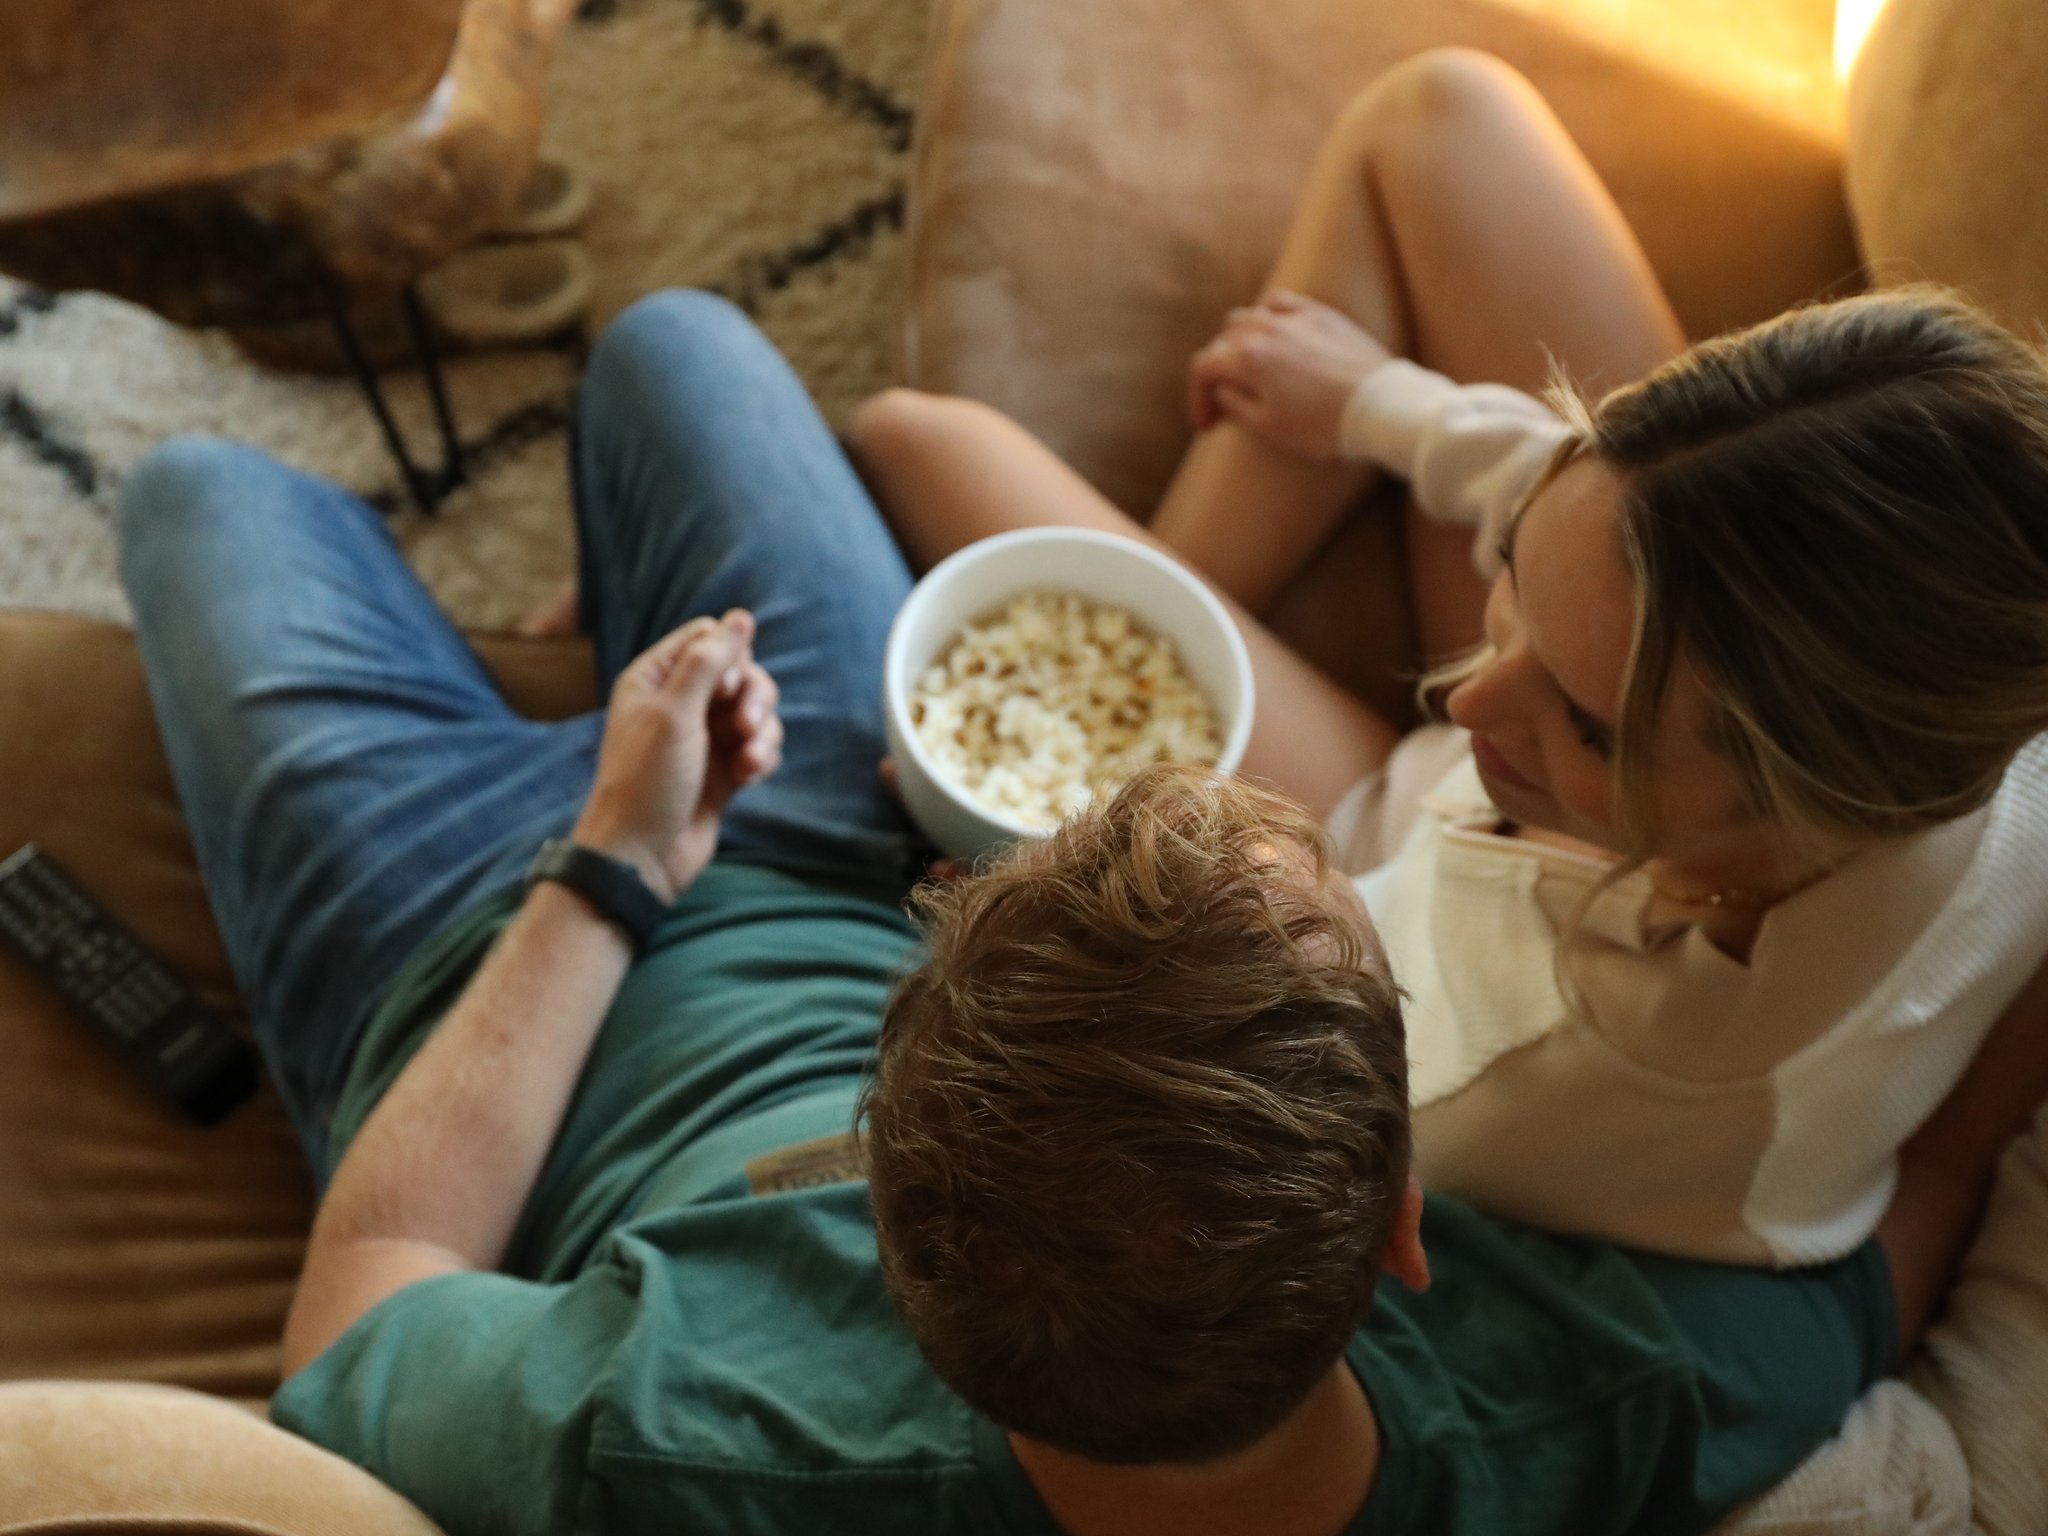 Man and woman eating popcorn on a couch